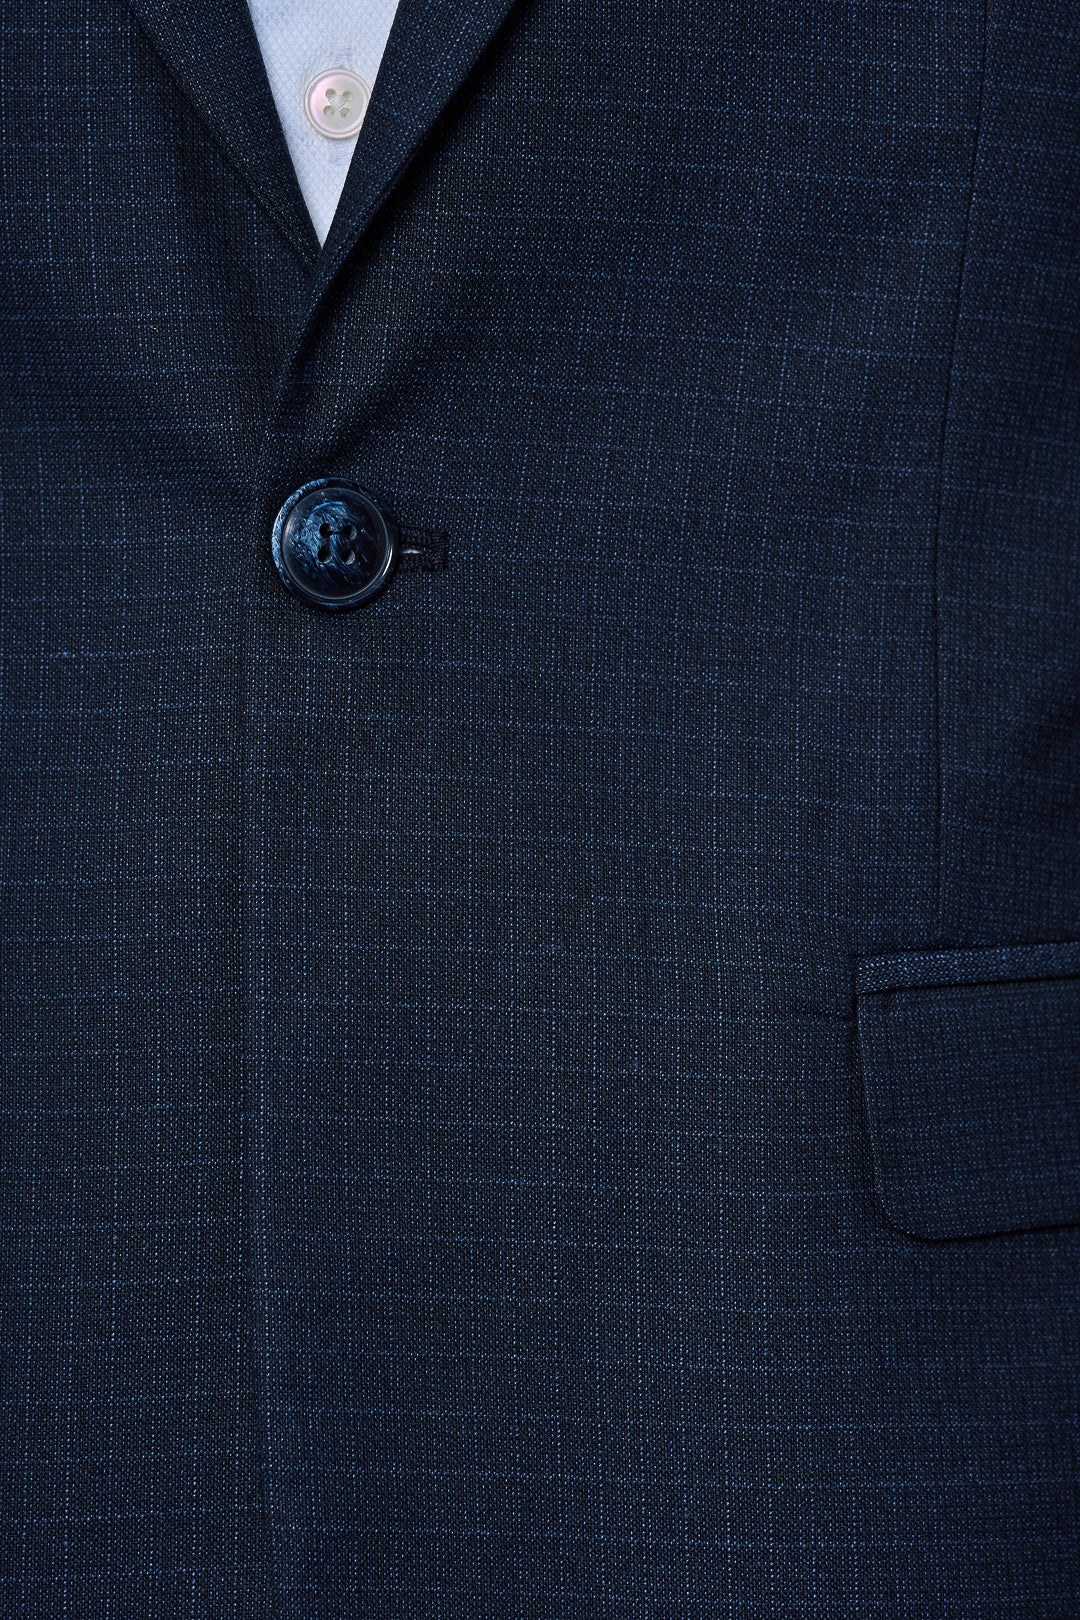 Navy Check Patterned Suit